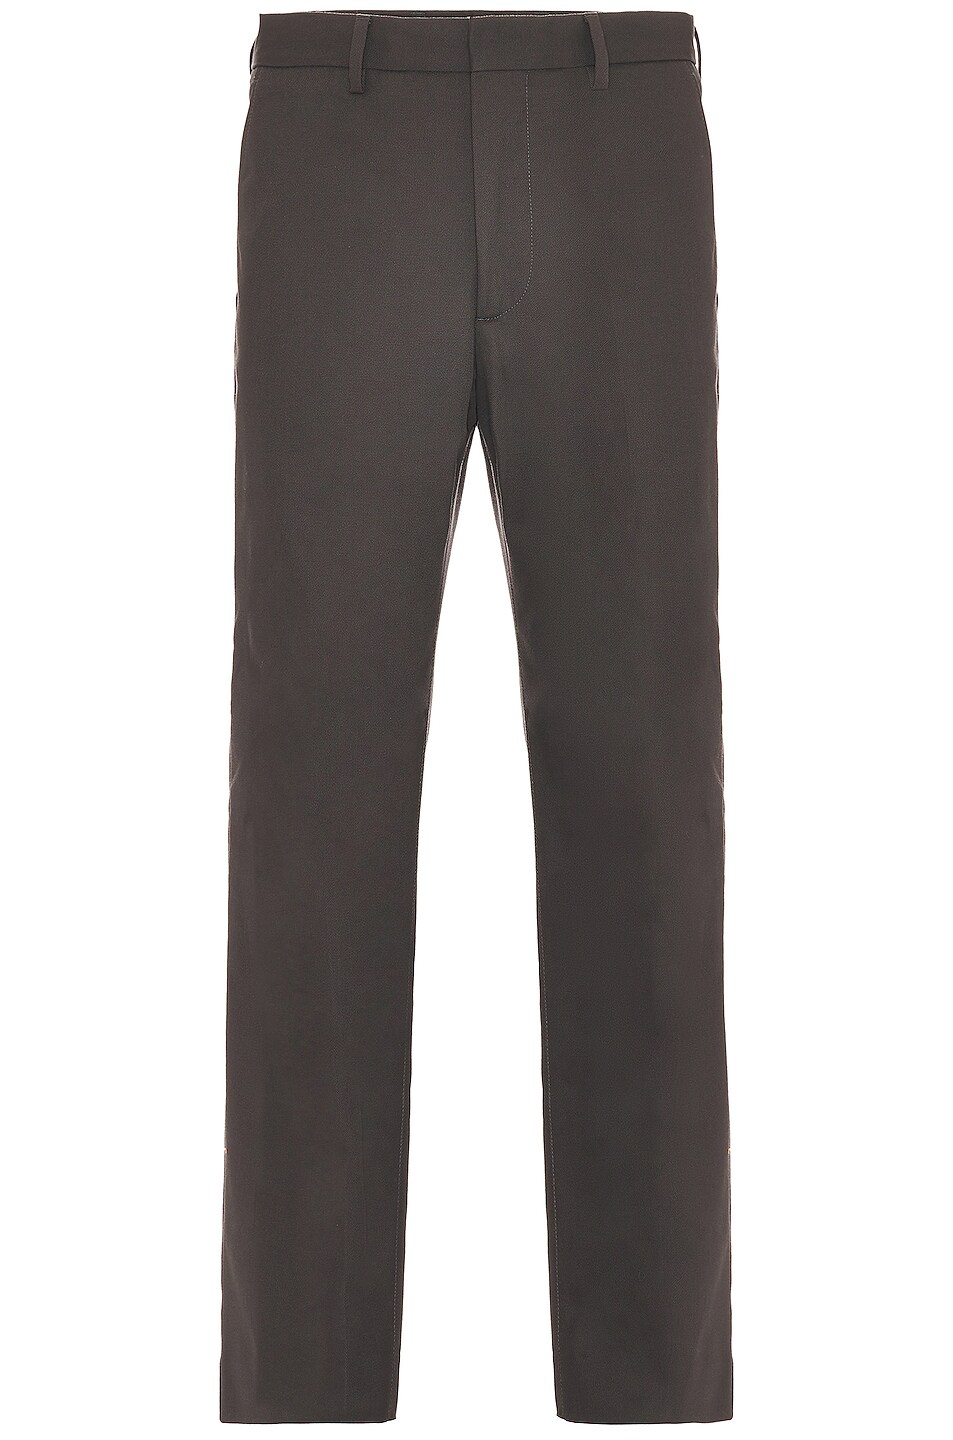 Image 1 of Acne Studios Trouser in Anthracite Grey